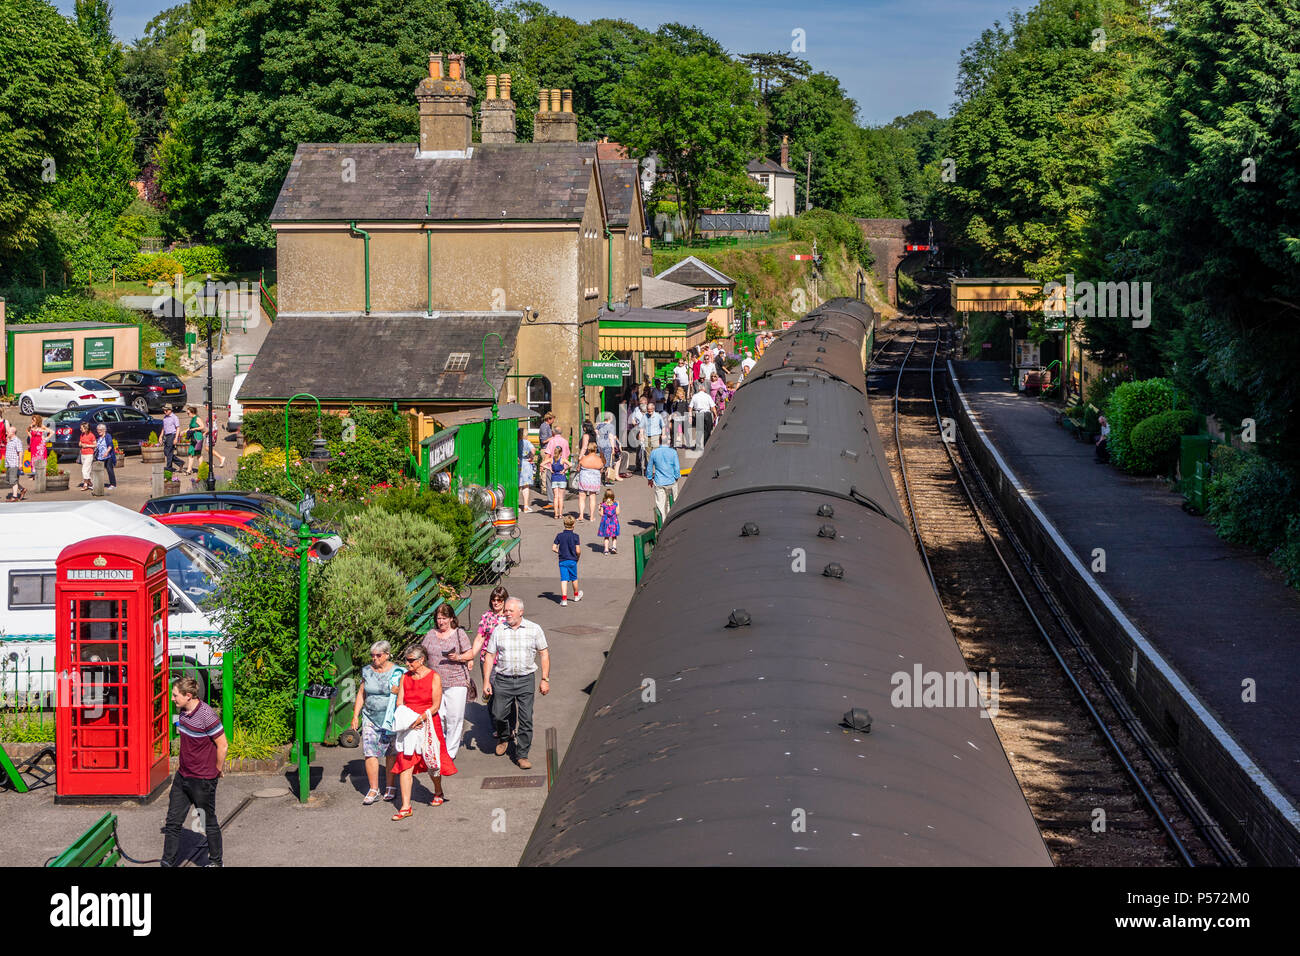 People enjoying a day out at Alresford Station along the Watercress Line Heritage Railway in Hampshire summer 2018, England, UK Stock Photo